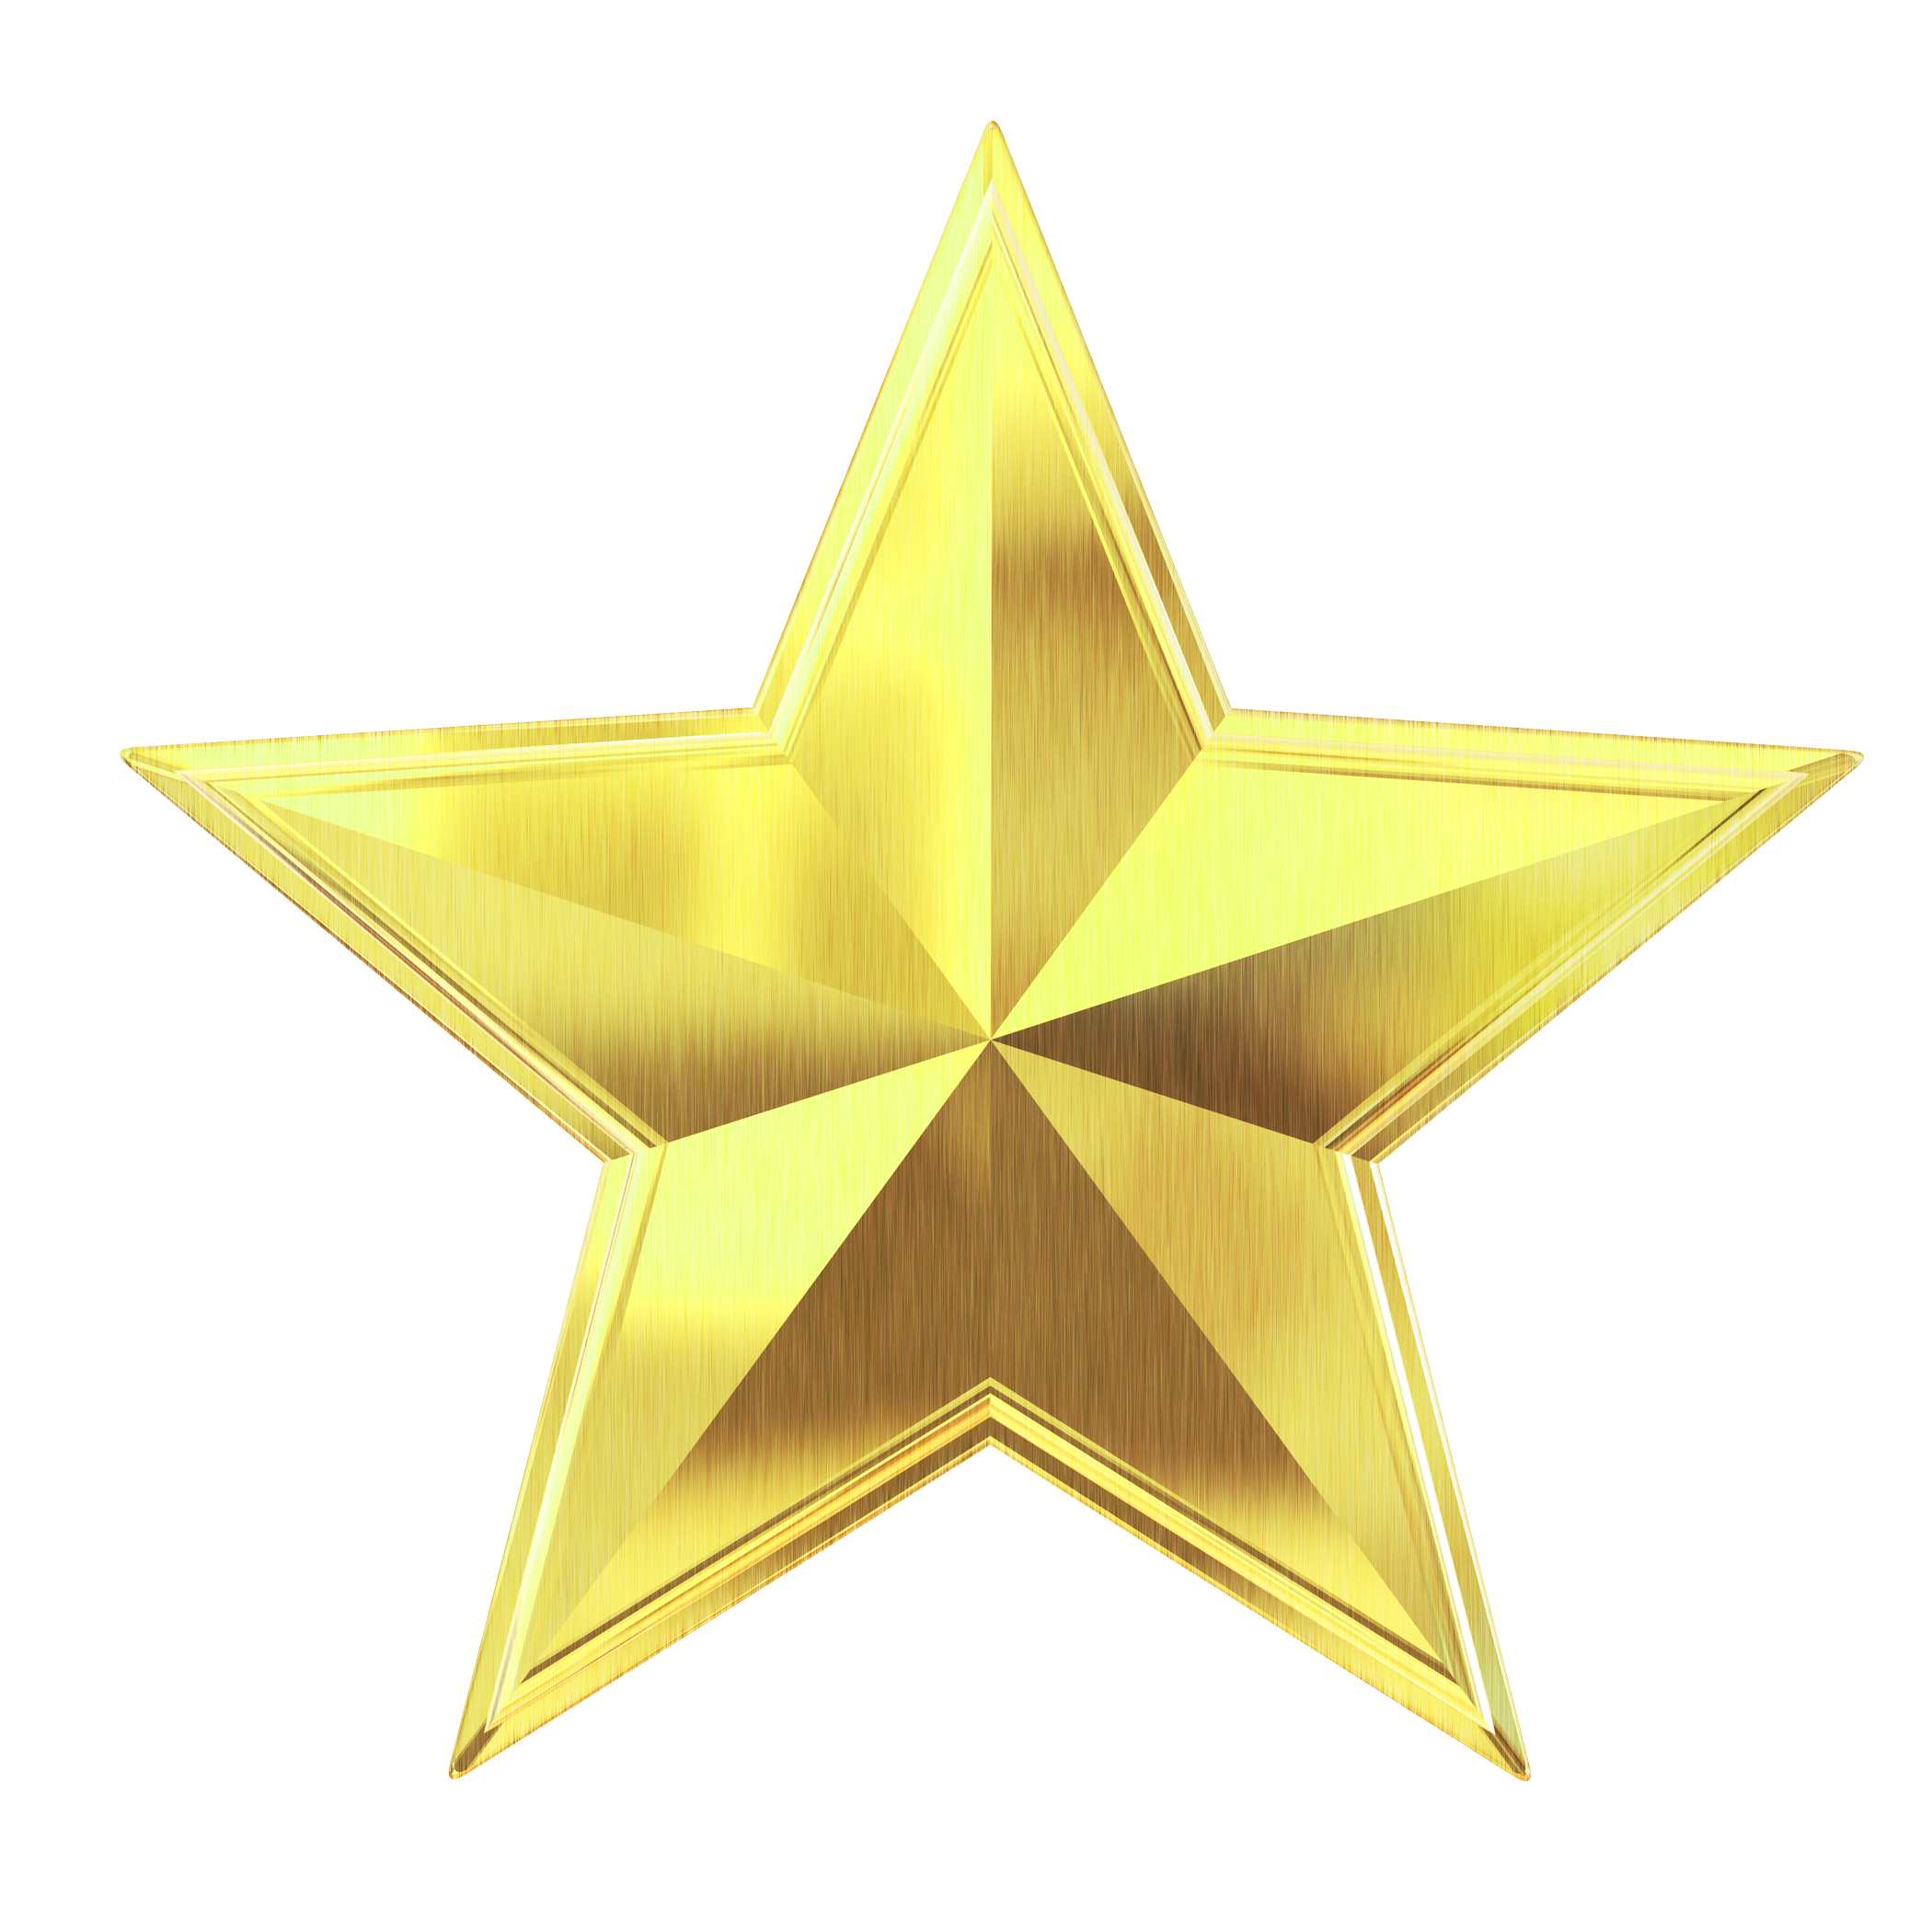 Star PNG image, free picture download